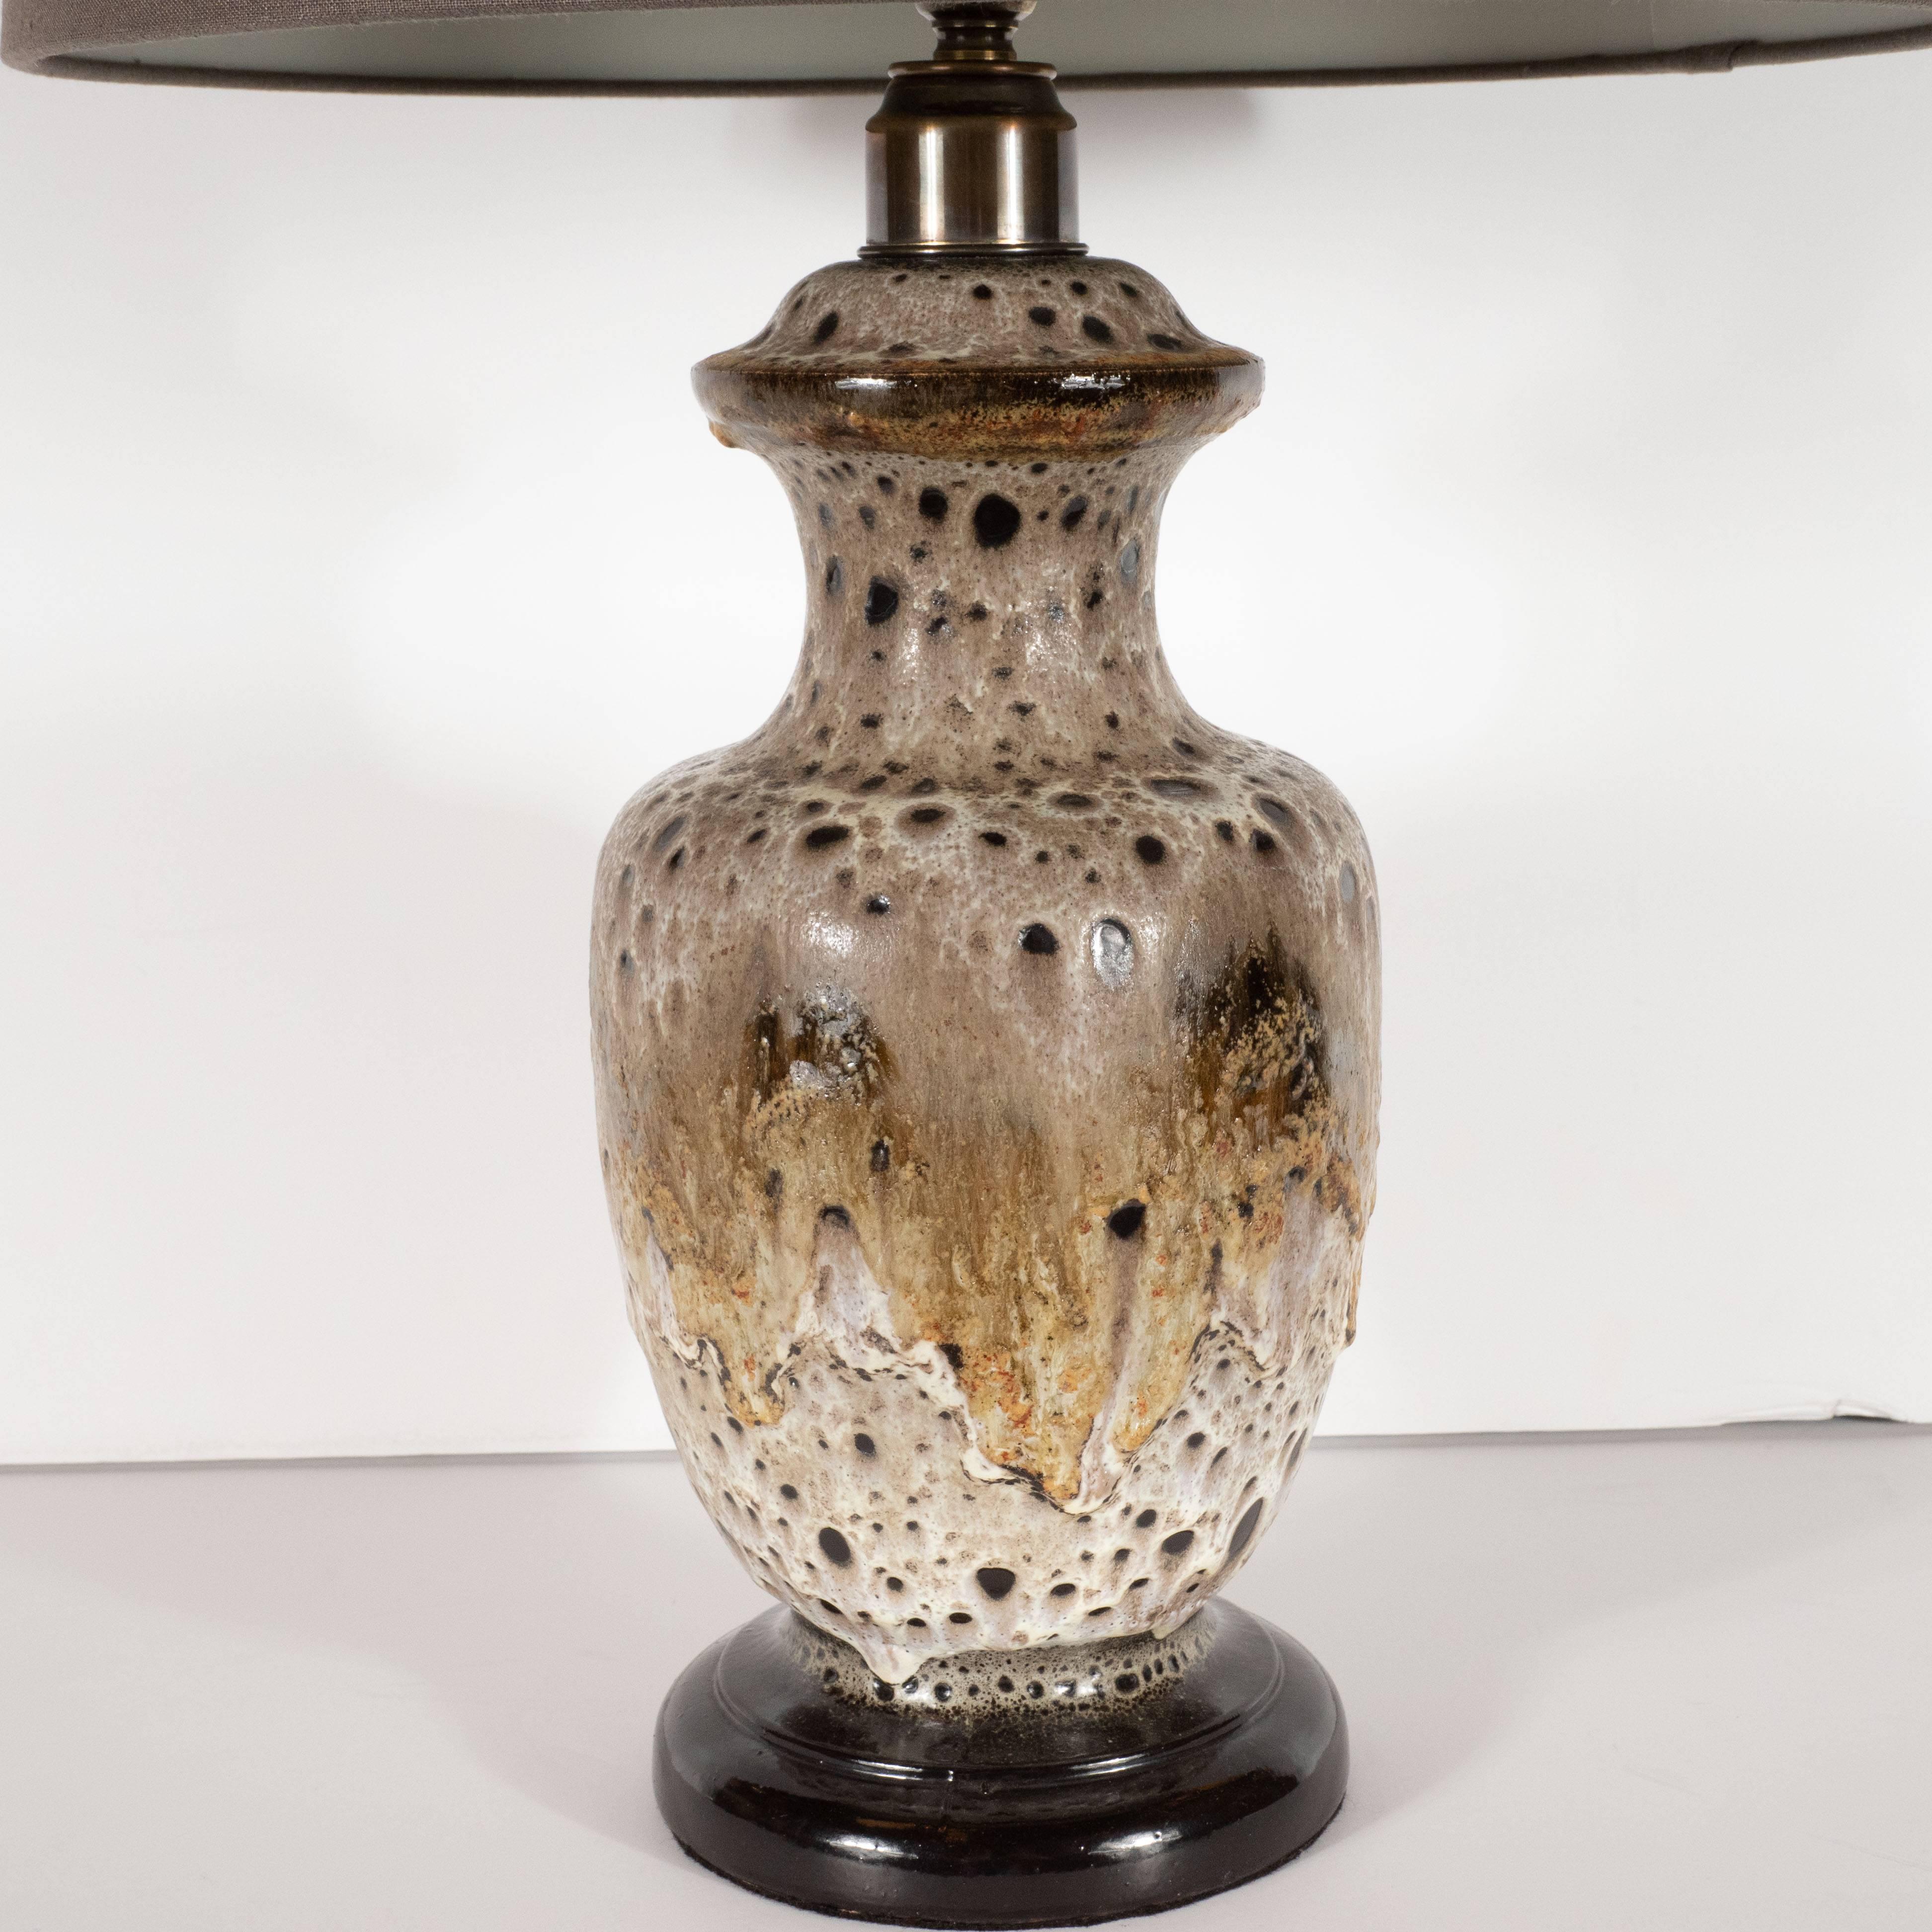 This striking ceramic table lamp was handcrafted and glazed in Germany, circa 1950. It offers an urn form body with a raised circular detail circumscribing the top of the neck. The beveled and stepped base of the piece is finished in a rich burnt